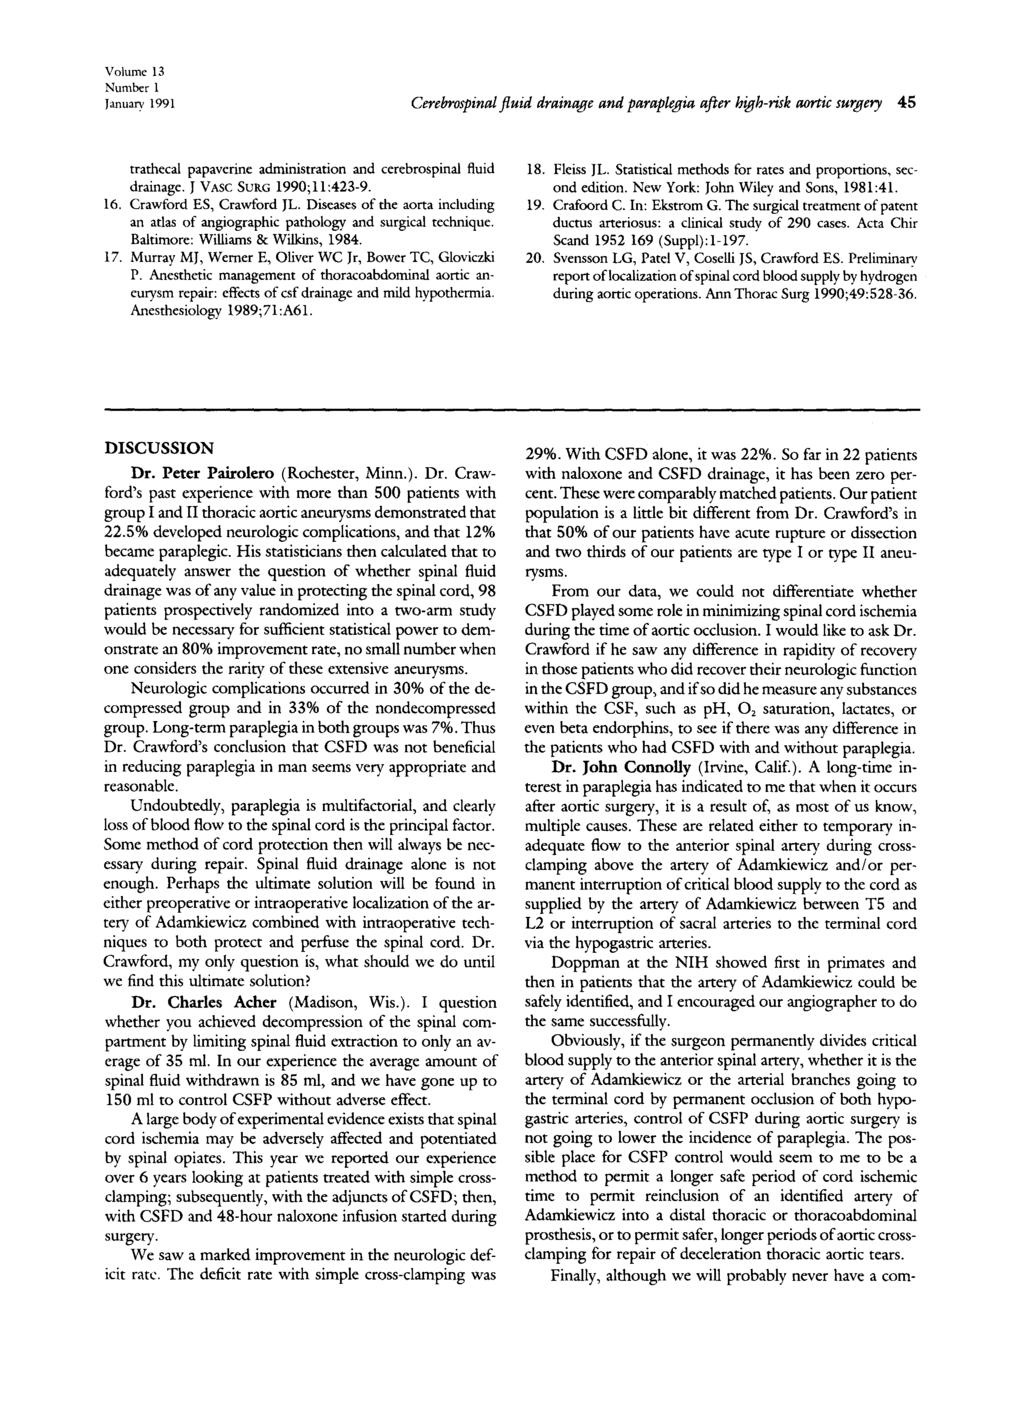 Volume 13 Number 1 January 1991 Cerebrospinal fluid drainage and paraplegia after high-risk aortic surgery 45 trathecal papaverine administration and cerebrospinal fluid drainage.